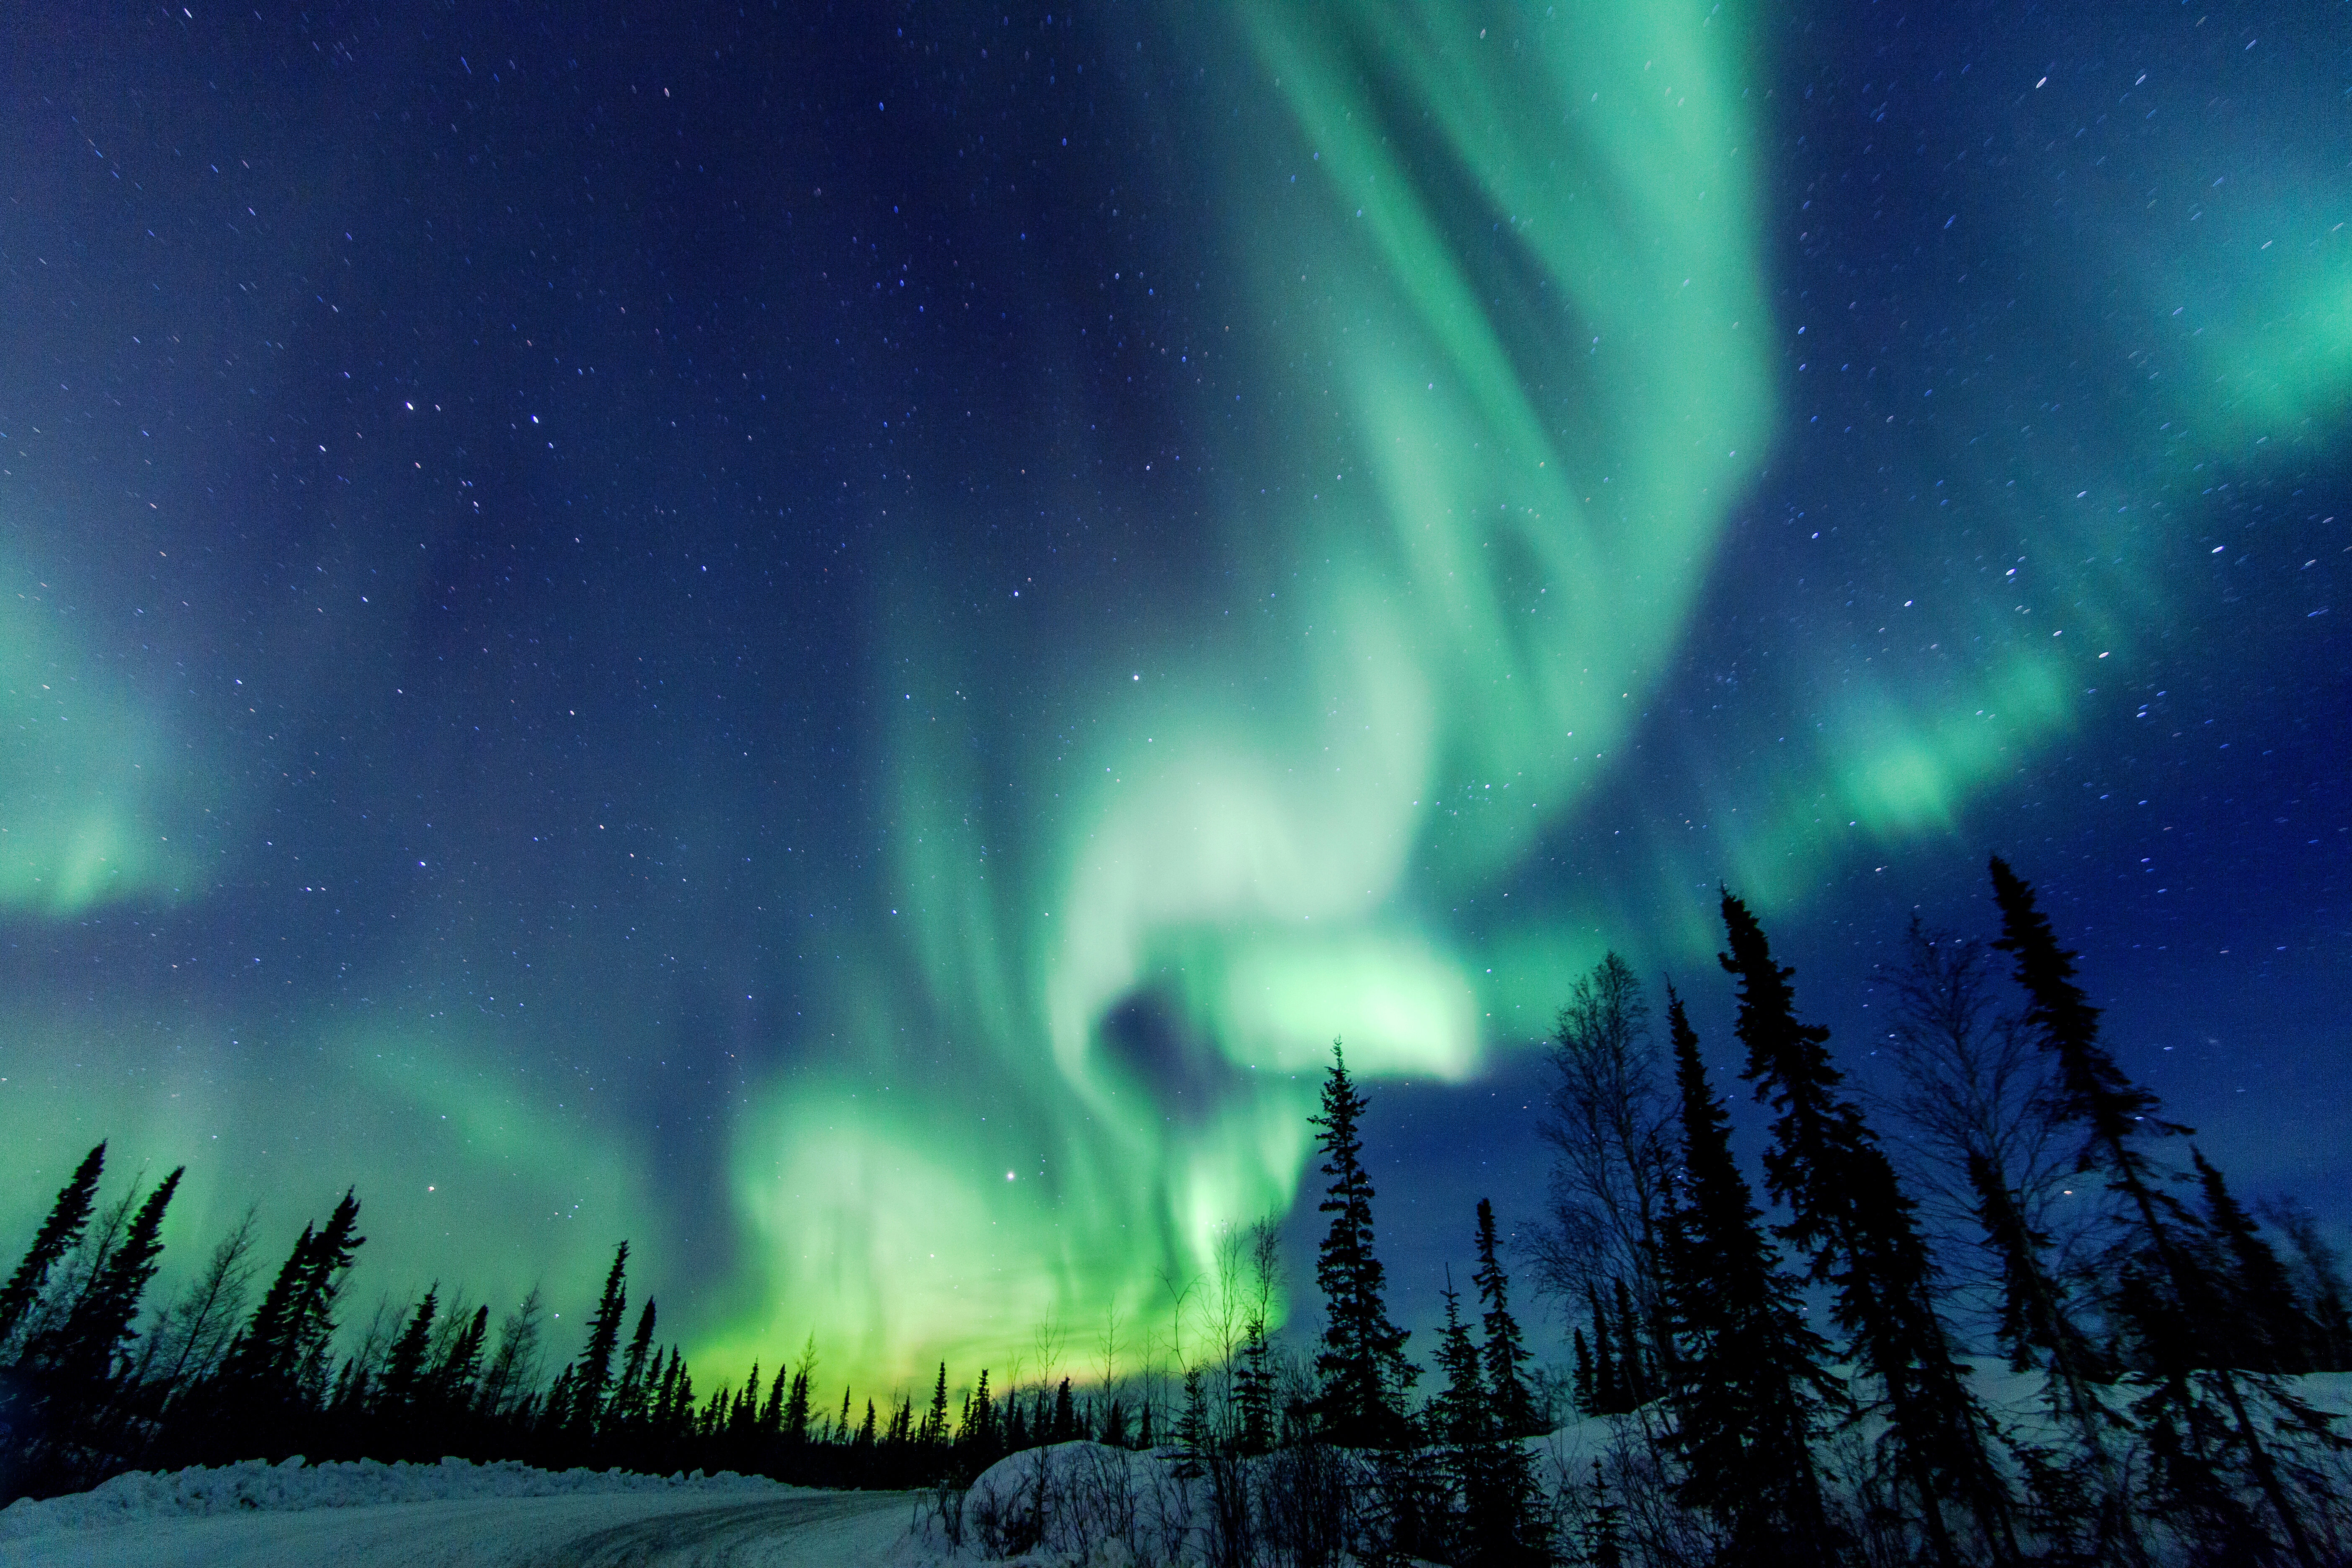 Iceland and Canada both offer prime views of the Northern Lights during the winter months.